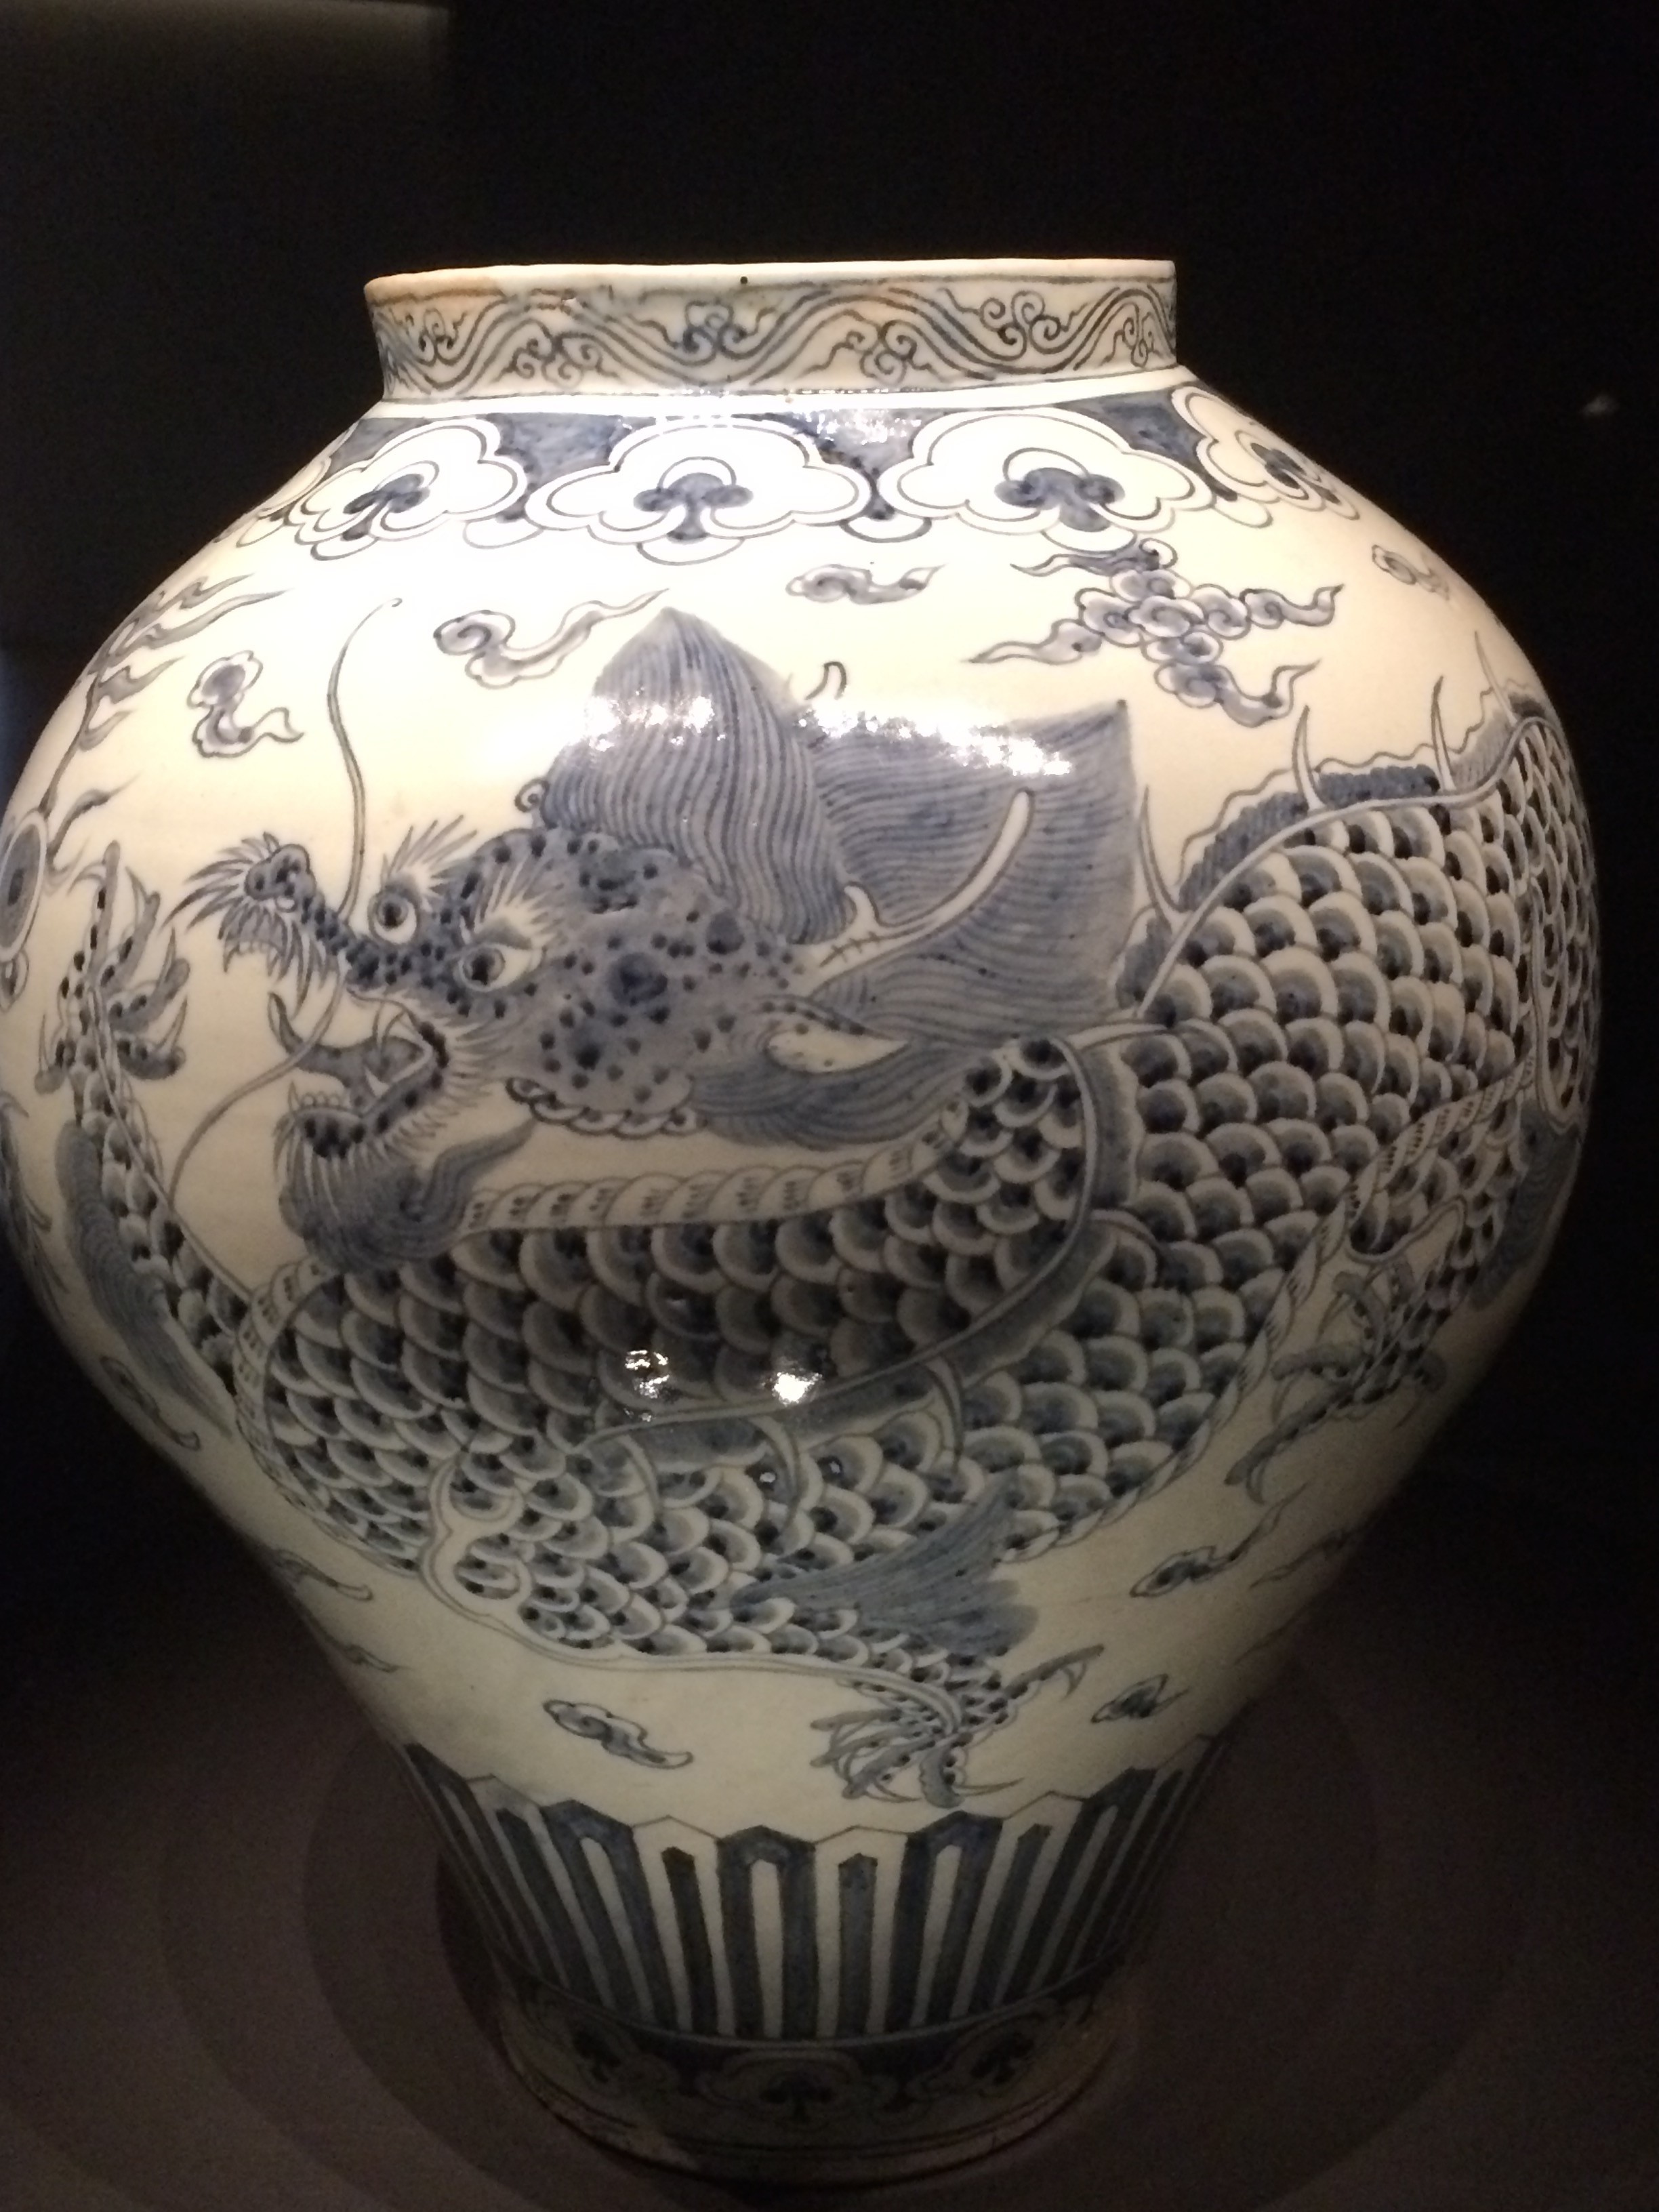 18th century blue and white porcelain vase from the Leeum Samsung Museum, Seoul  (Foto: Suzy Menkes)